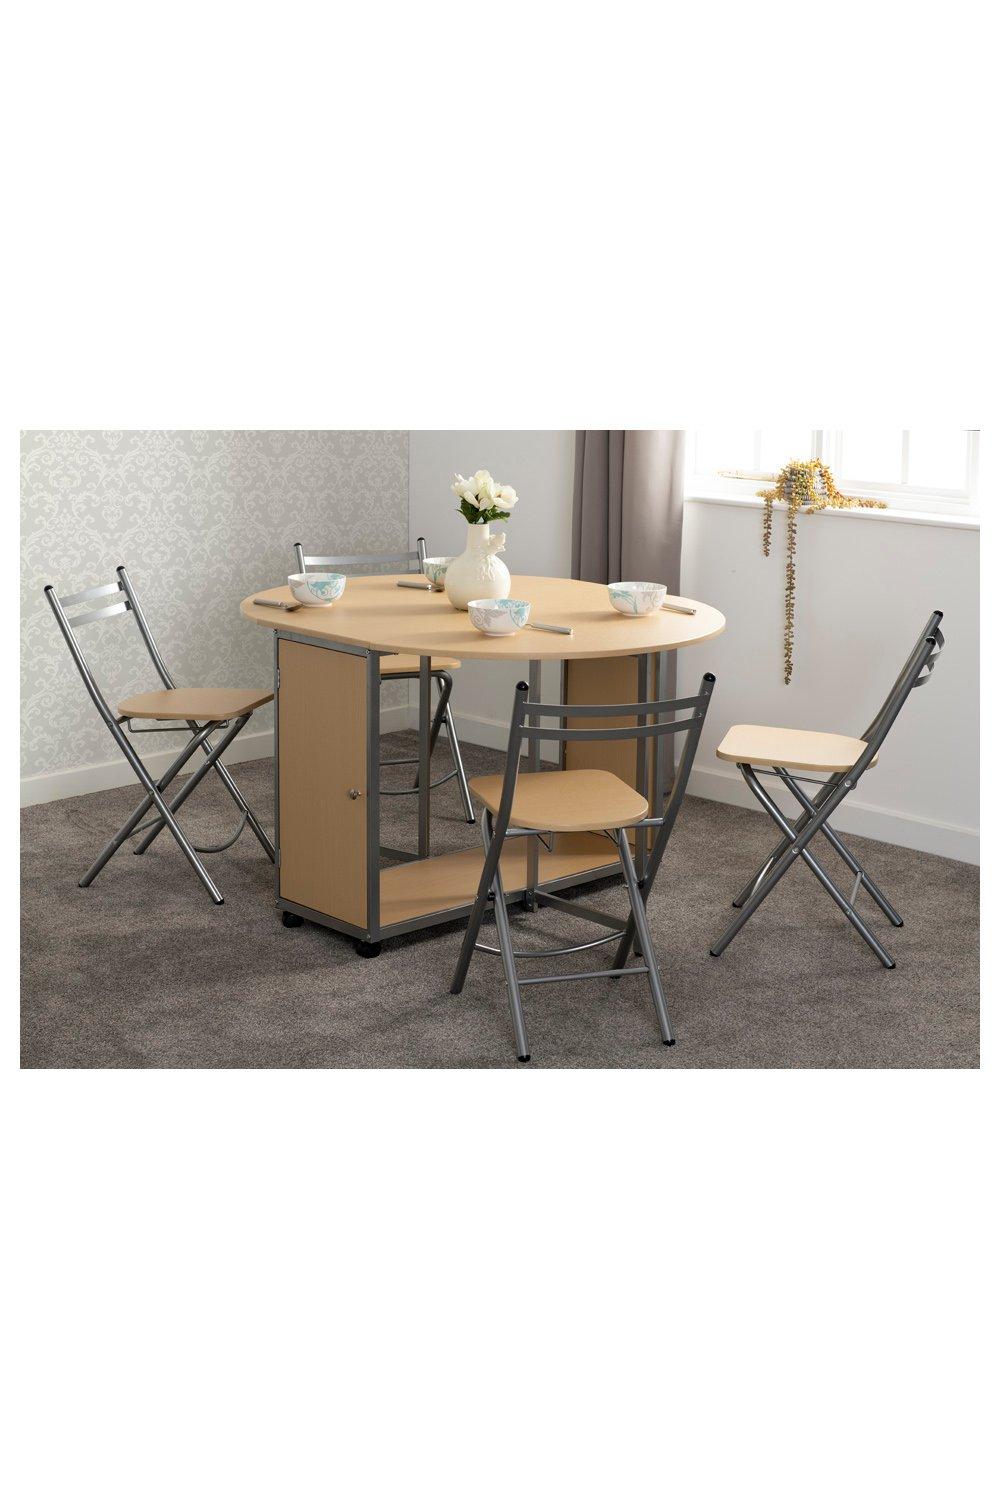 Seconique Budget Butterfly 138cm Beech Dining Table and 4 Chairs Set